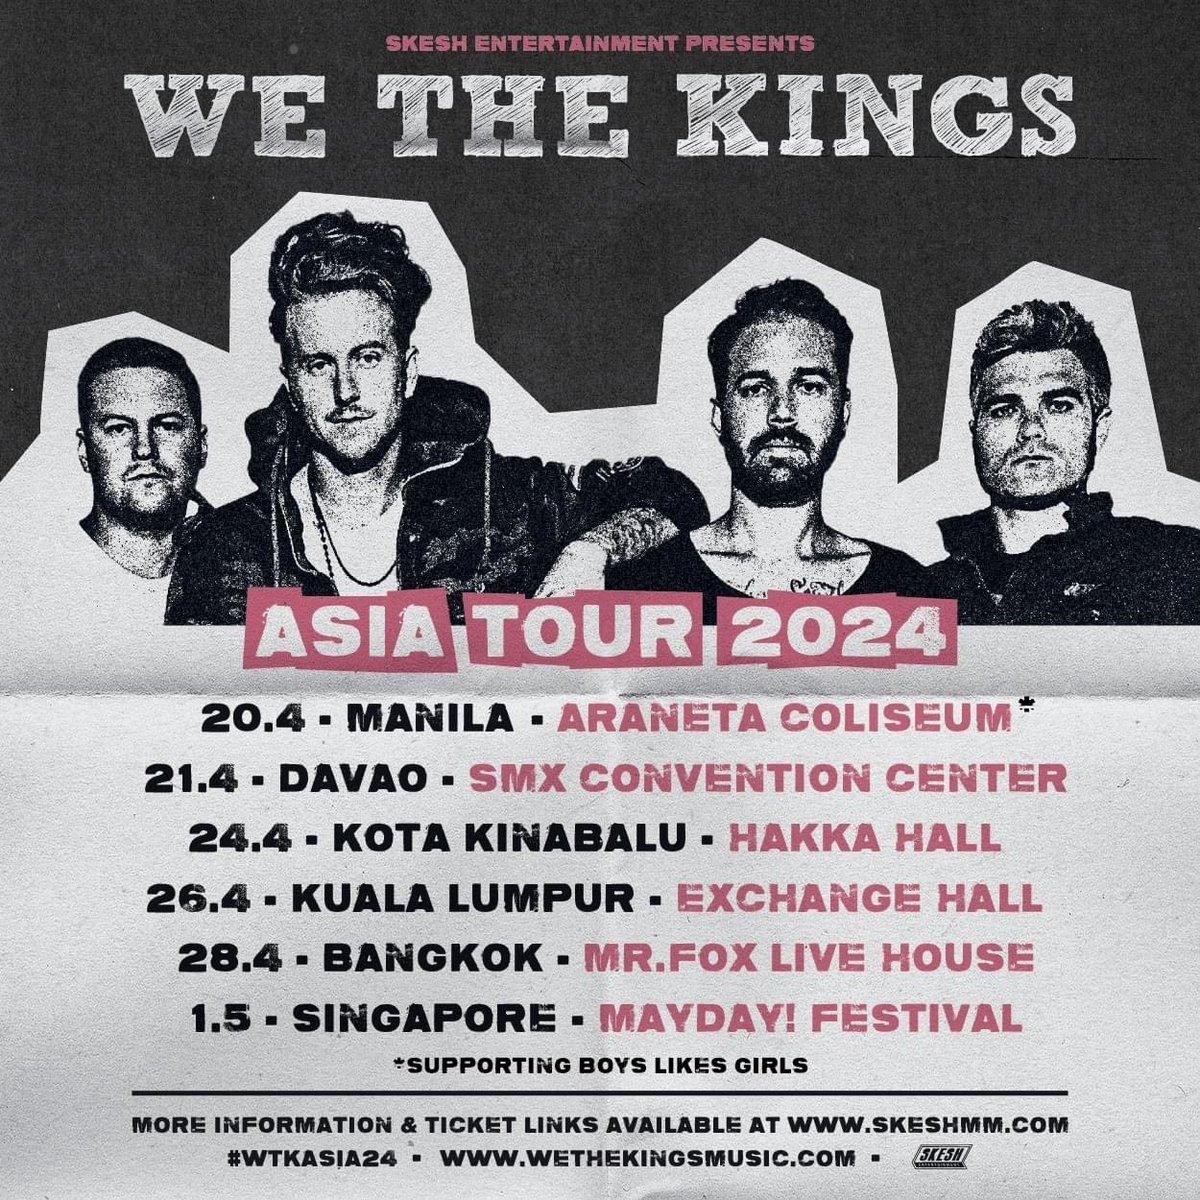 Catch @WeTheKings touring throughout Asia this April/May! Tickets on sale for Manila, Singapore! The rest will be on sale 16th March at 12pm (local time). See you there! #WeTheKings #WTKAsia24 #SkeshEntertainment